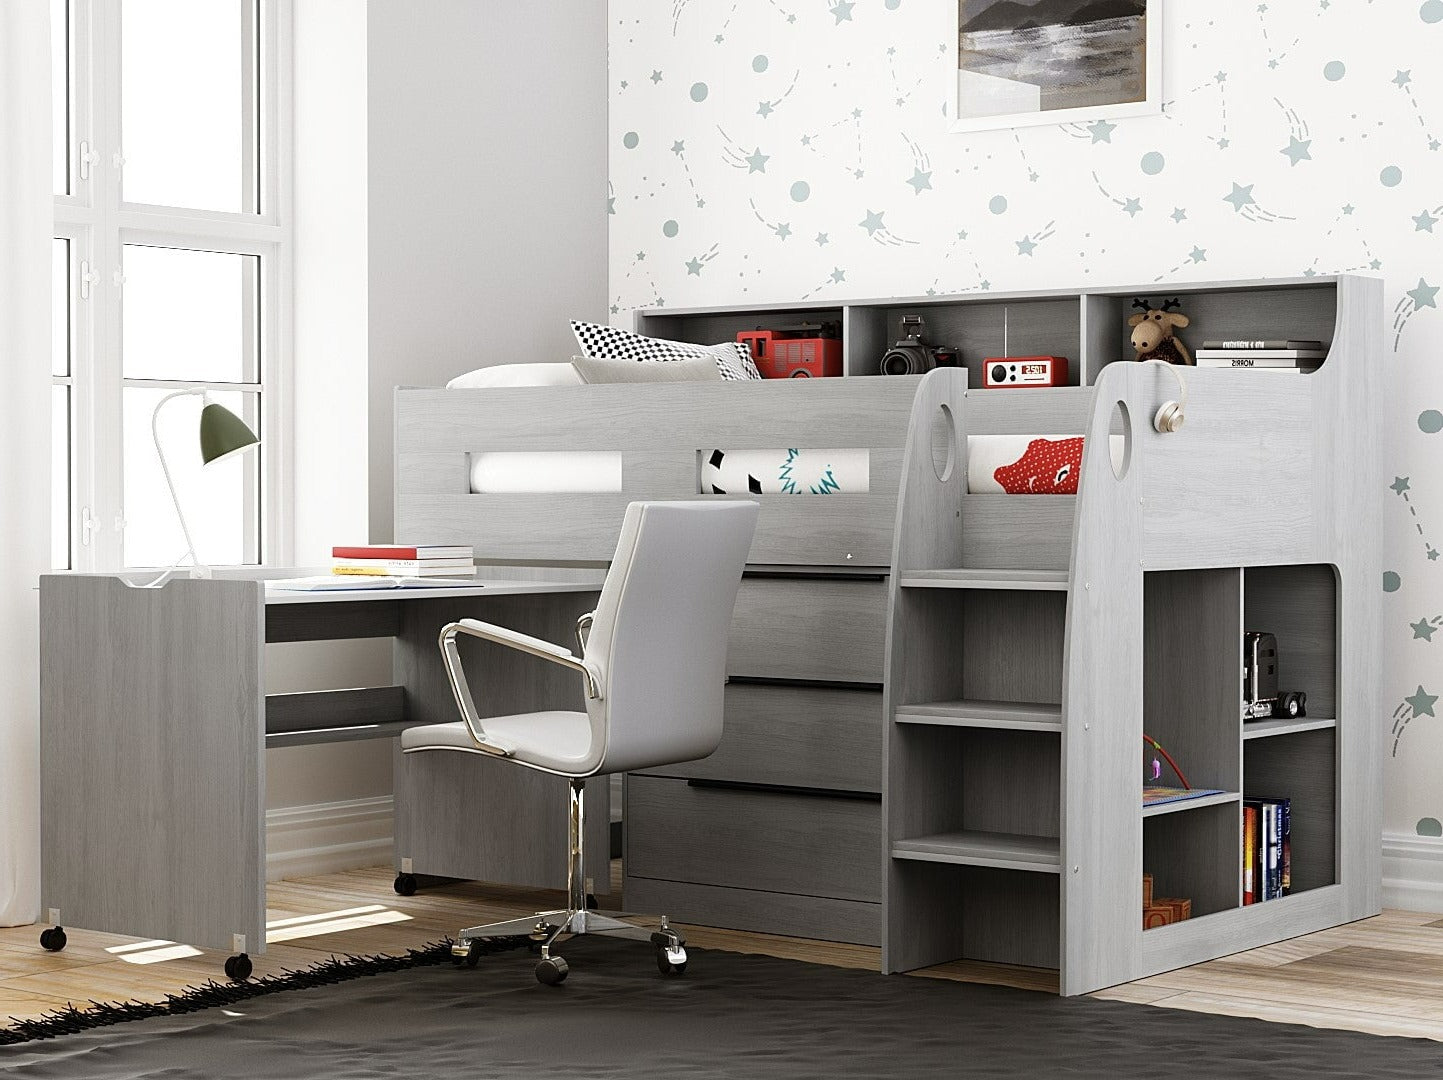 Zion Grey Mid Sleeper Cabin Bed with Drawers, Shelves & Pull Out Desk - 3ft Single Casa Maria Designs 